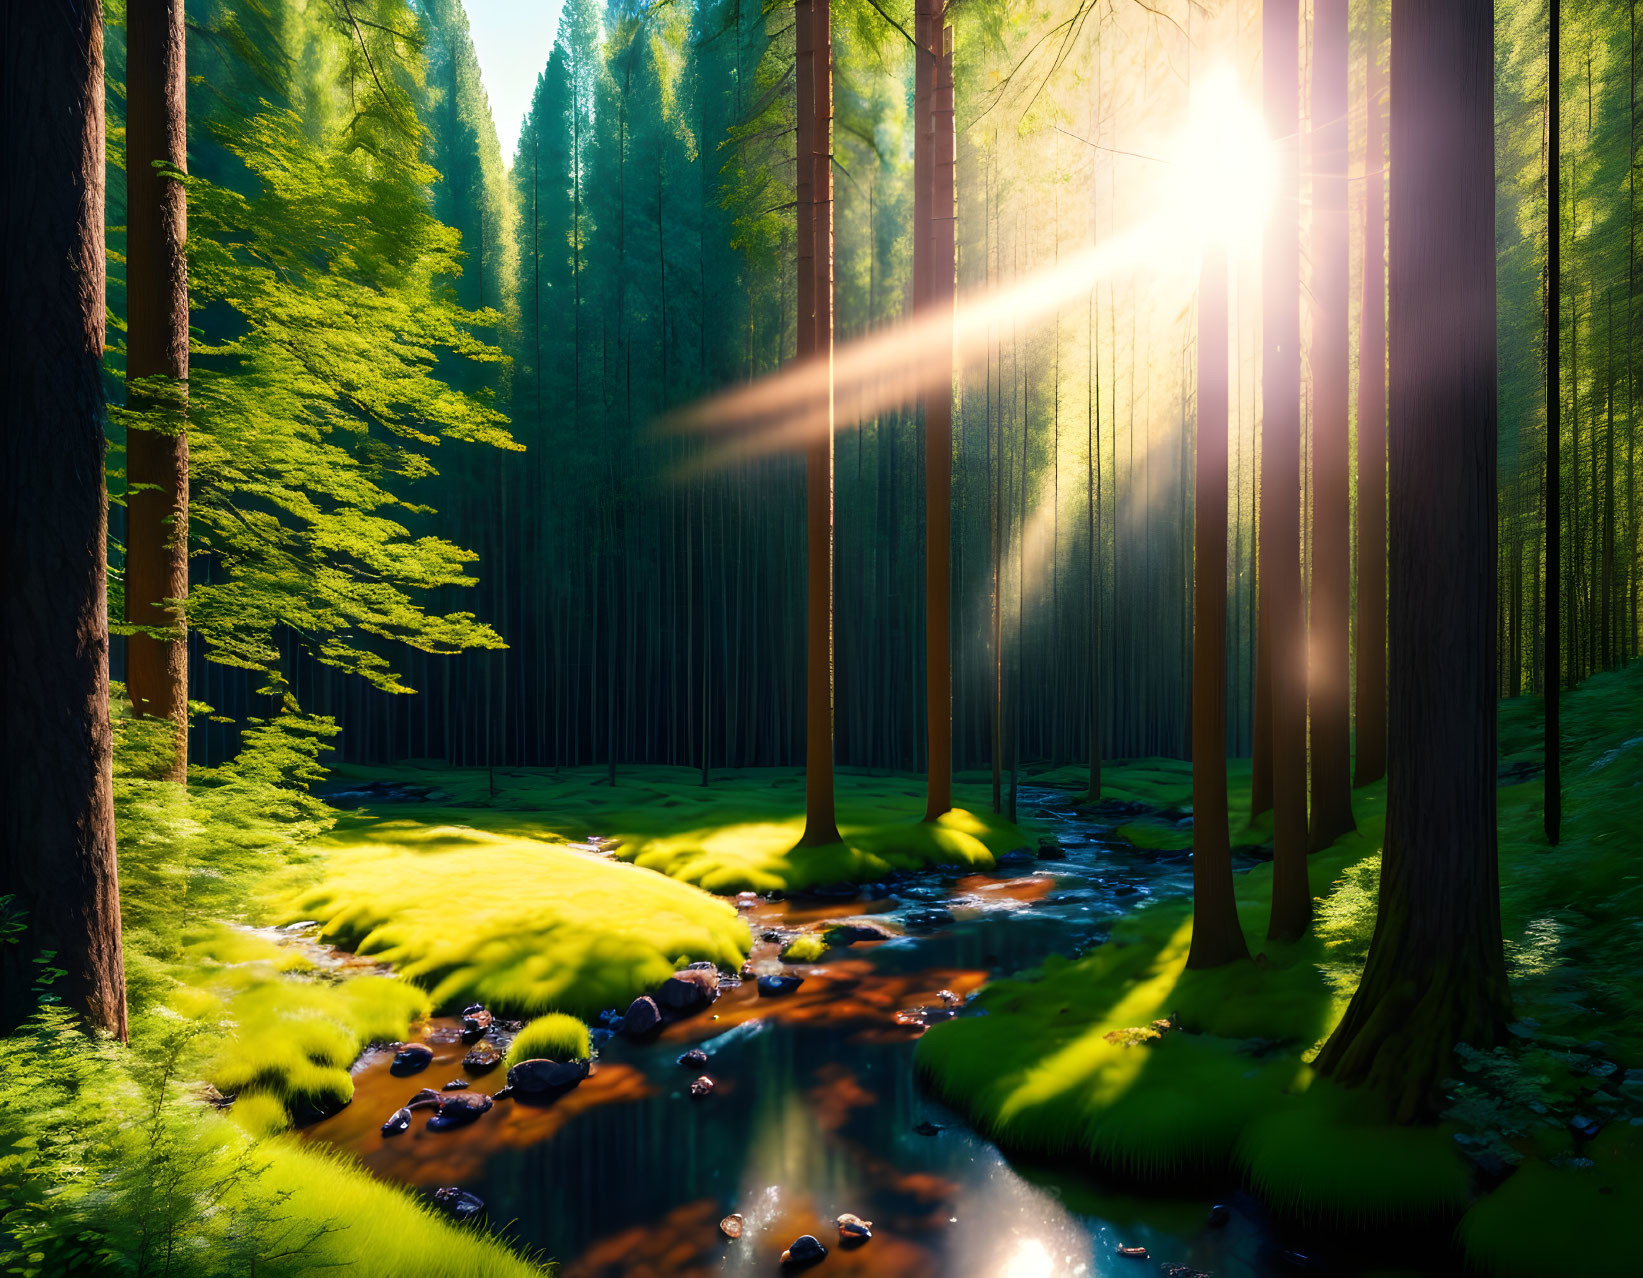 Forest Stream Illuminated by Sunlight Through Tall Trees